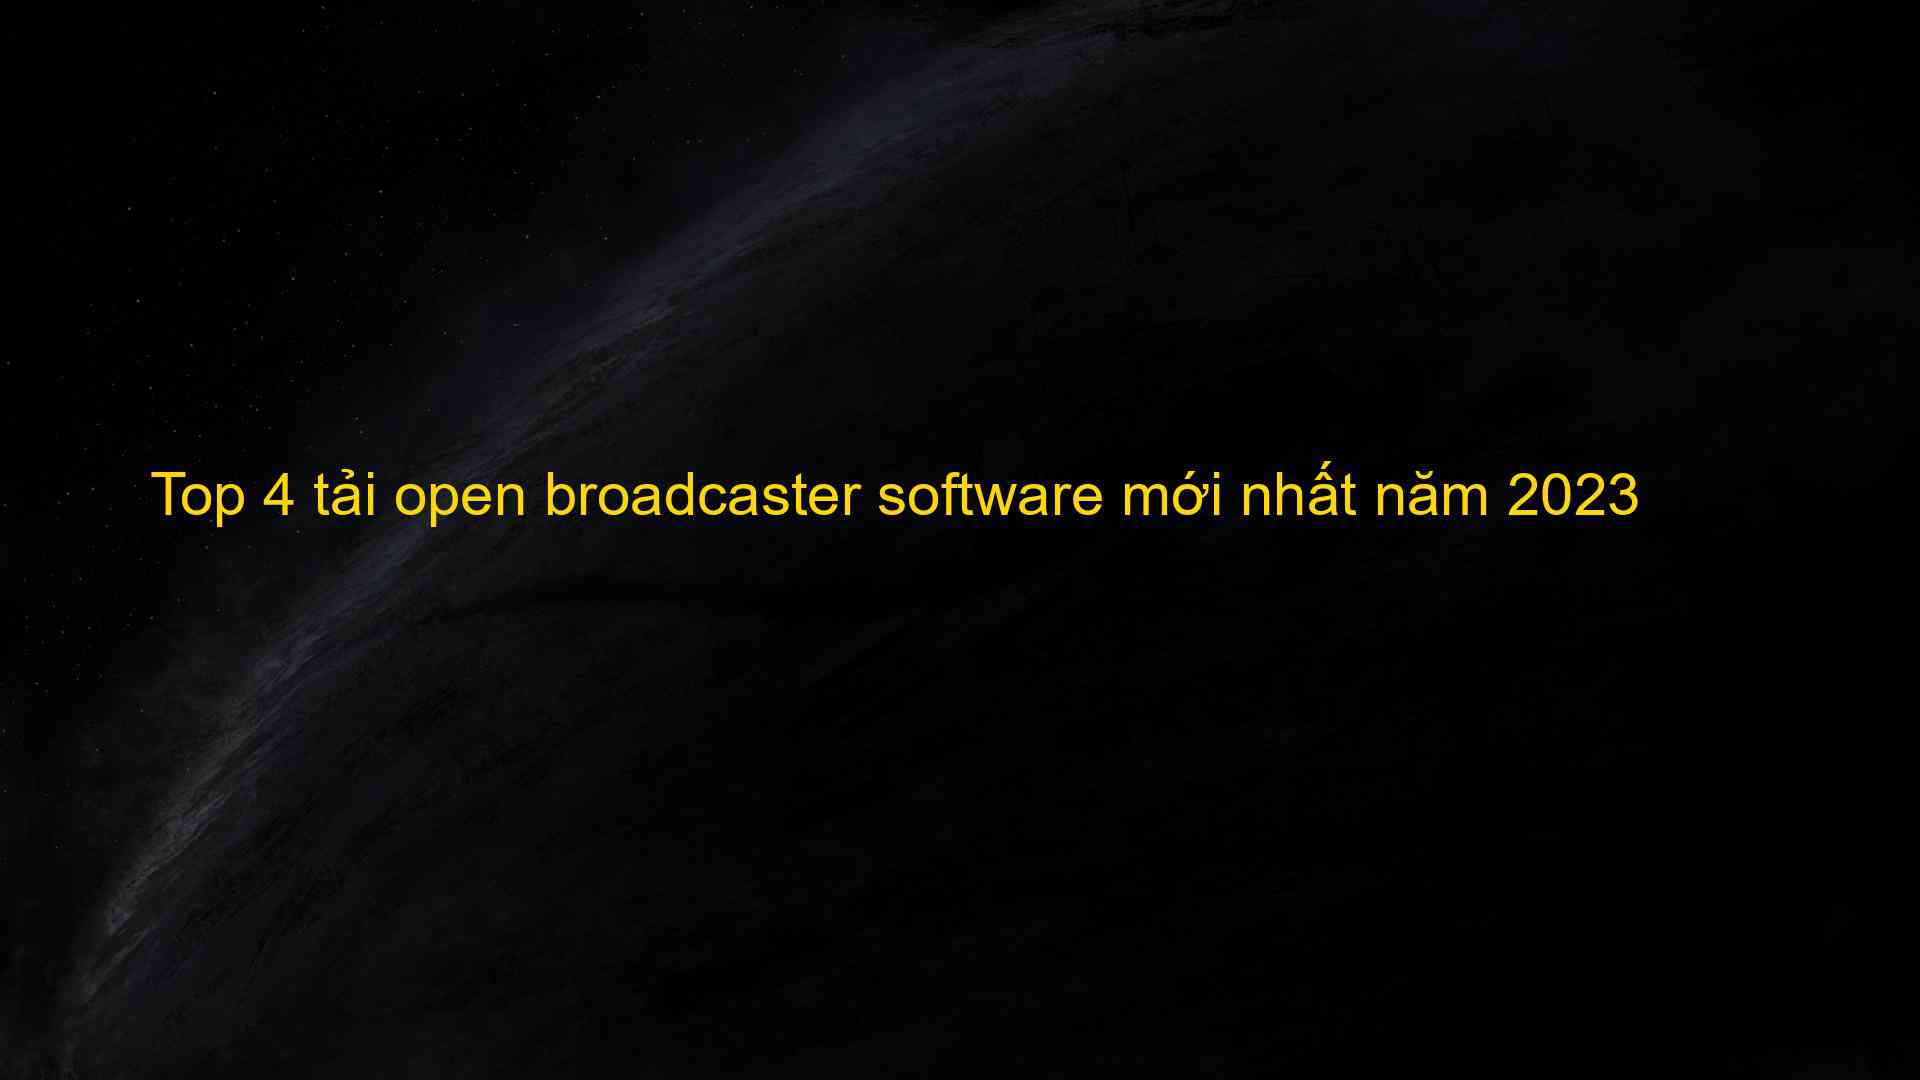 Top 4 Tải Open Broadcaster Software Mới Nhất Năm 2023 The First Knowledge Sharing Application 2859